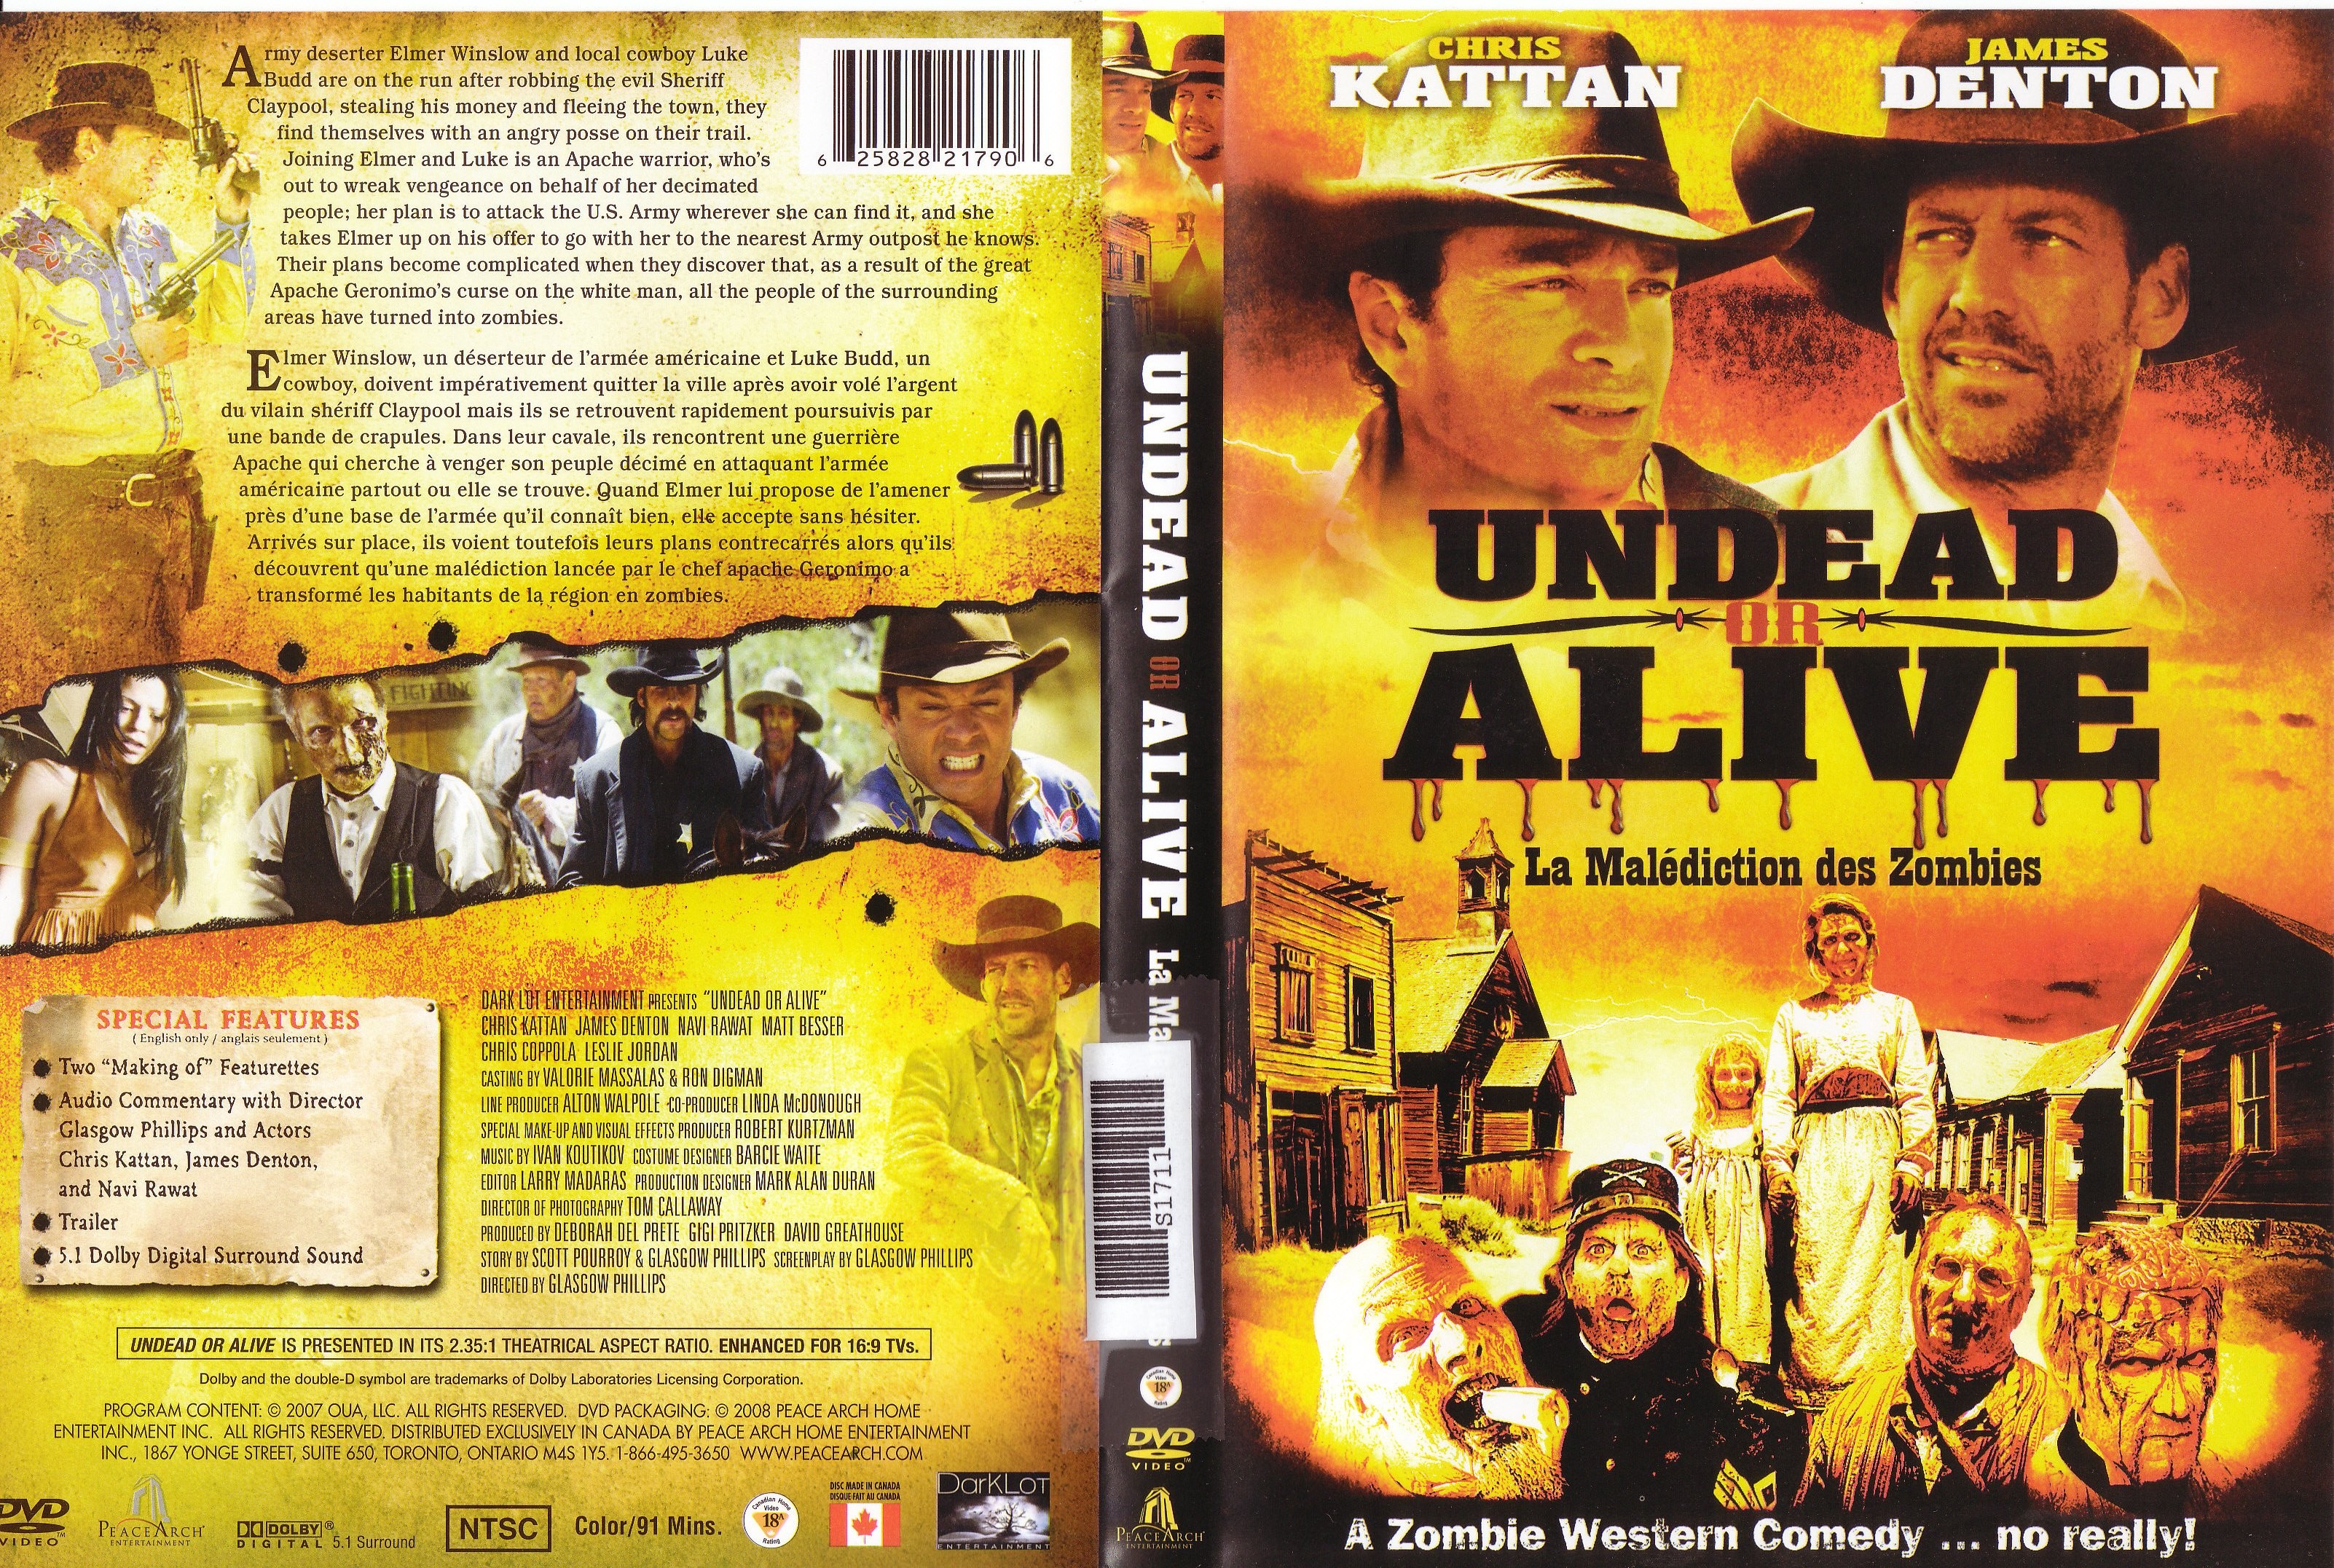 Jaquette DVD Undead or alive